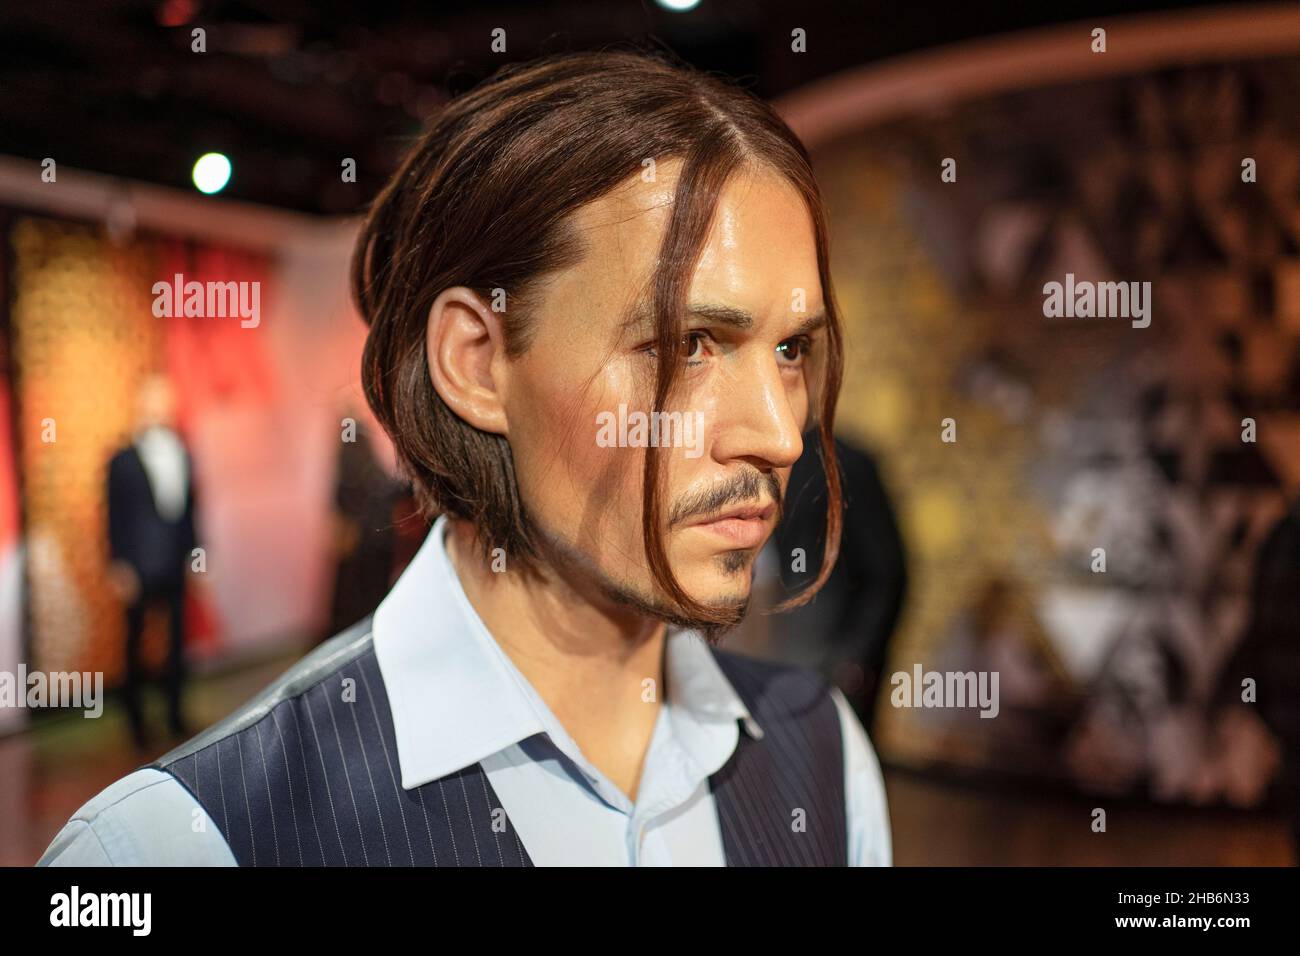 Johnny Depp wax sculpture at Madame Tussauds Istanbul. Johnny Depp is an American actor, producer, and musician. Stock Photo